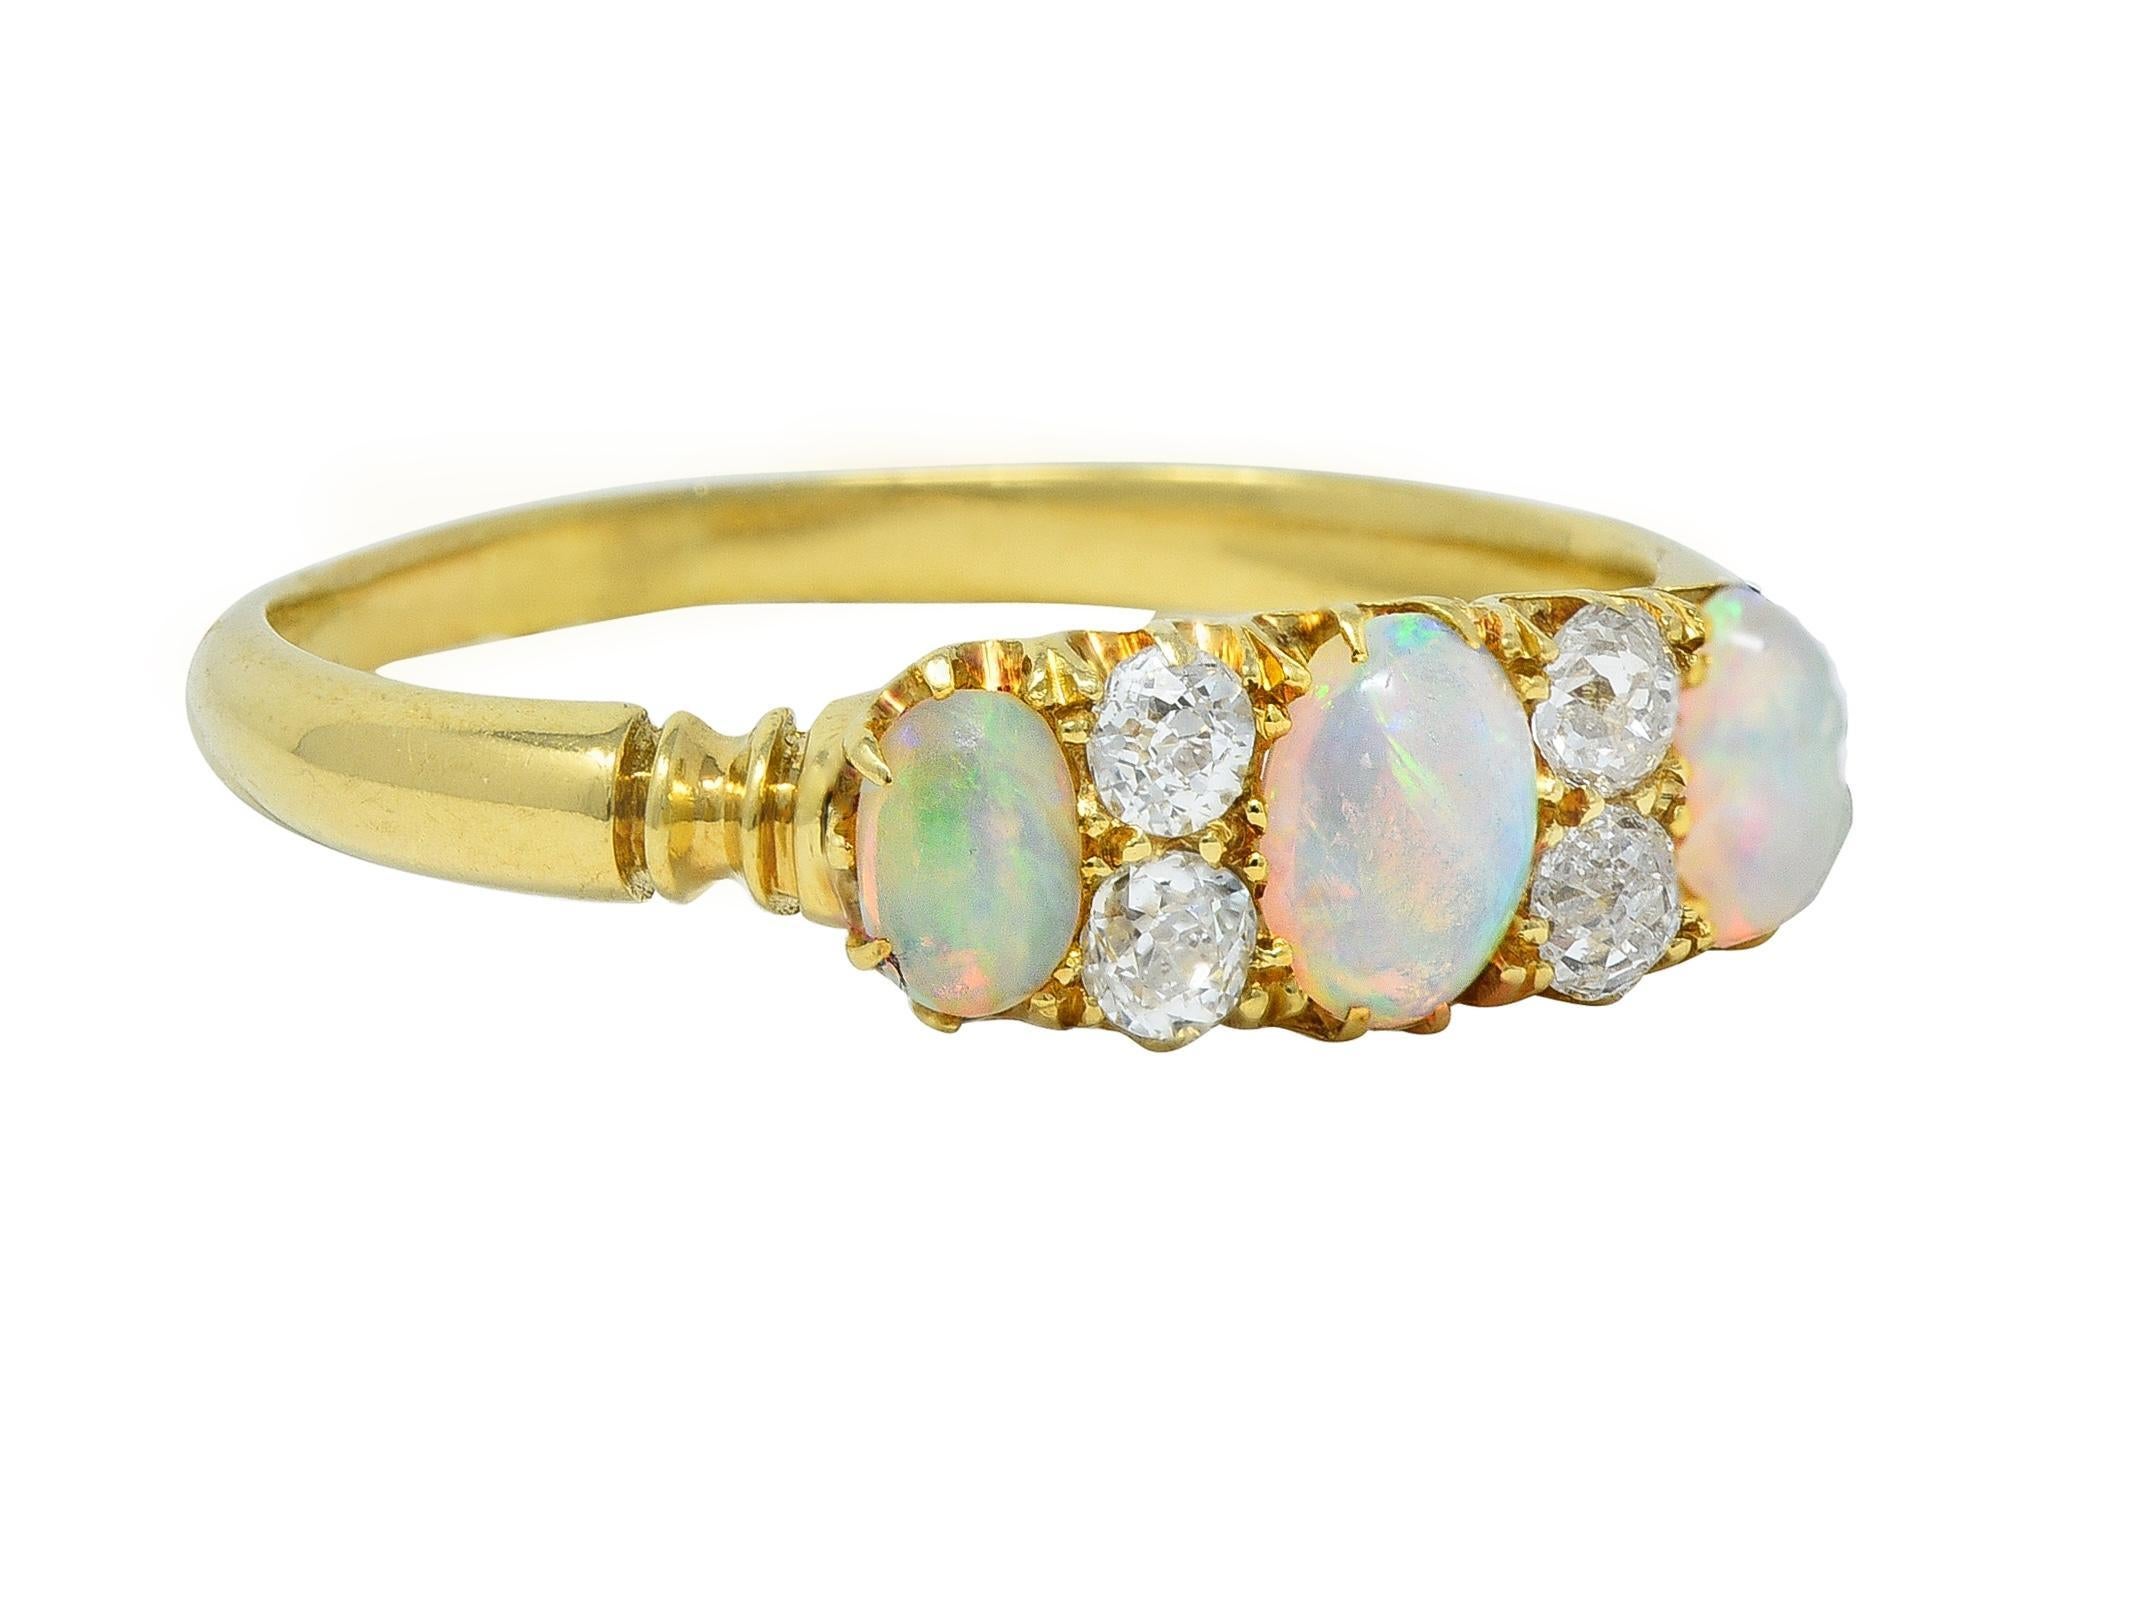 Featuring three oval-shaped opal cabochons prong set east to west
Graduated and ranging in size from 2.5 4.5 mm to 3.5 x 5.0 mm 
Translucent white in body color with spectral play-of-color
Accented by old mine cut diamonds prong set in